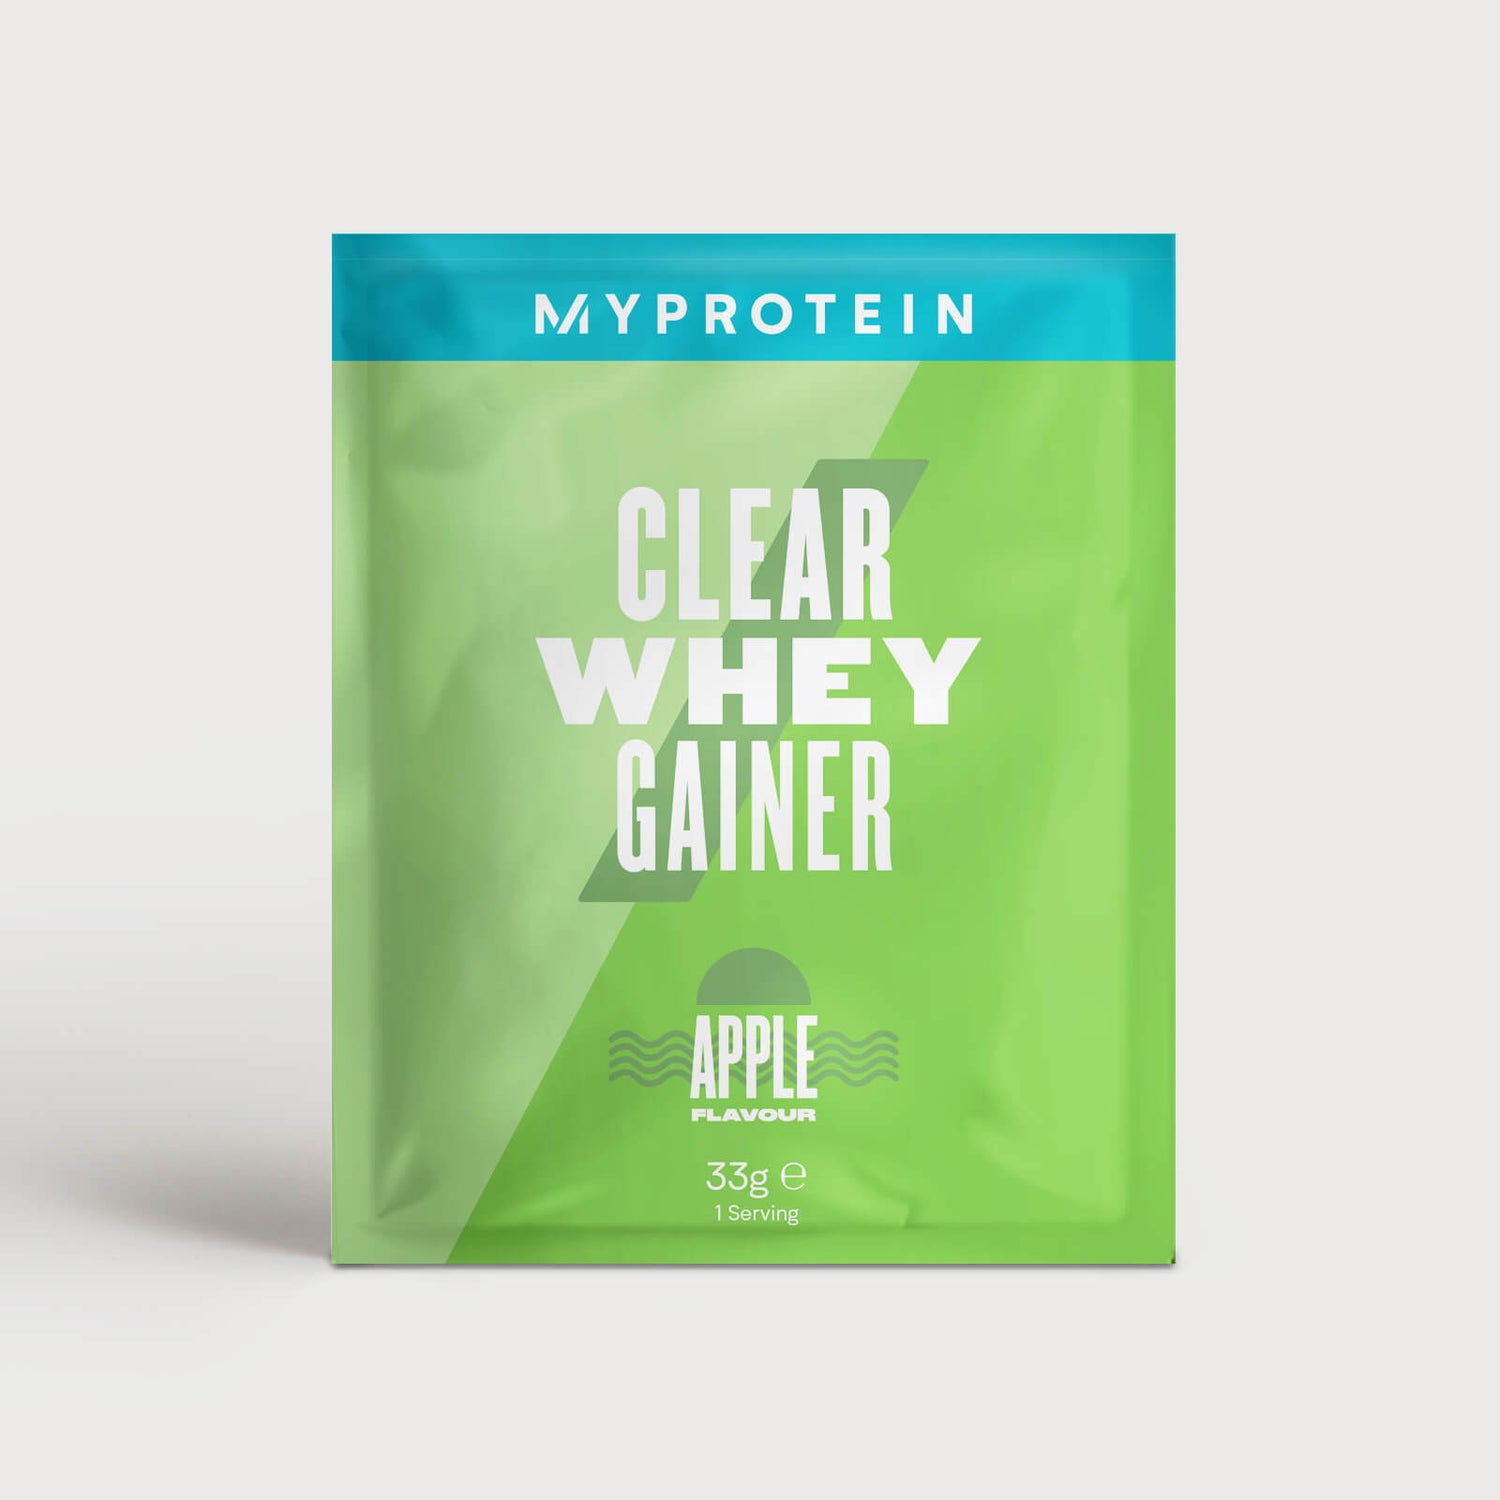 Clear Whey Gainer (Sample) - 1servings - Apple